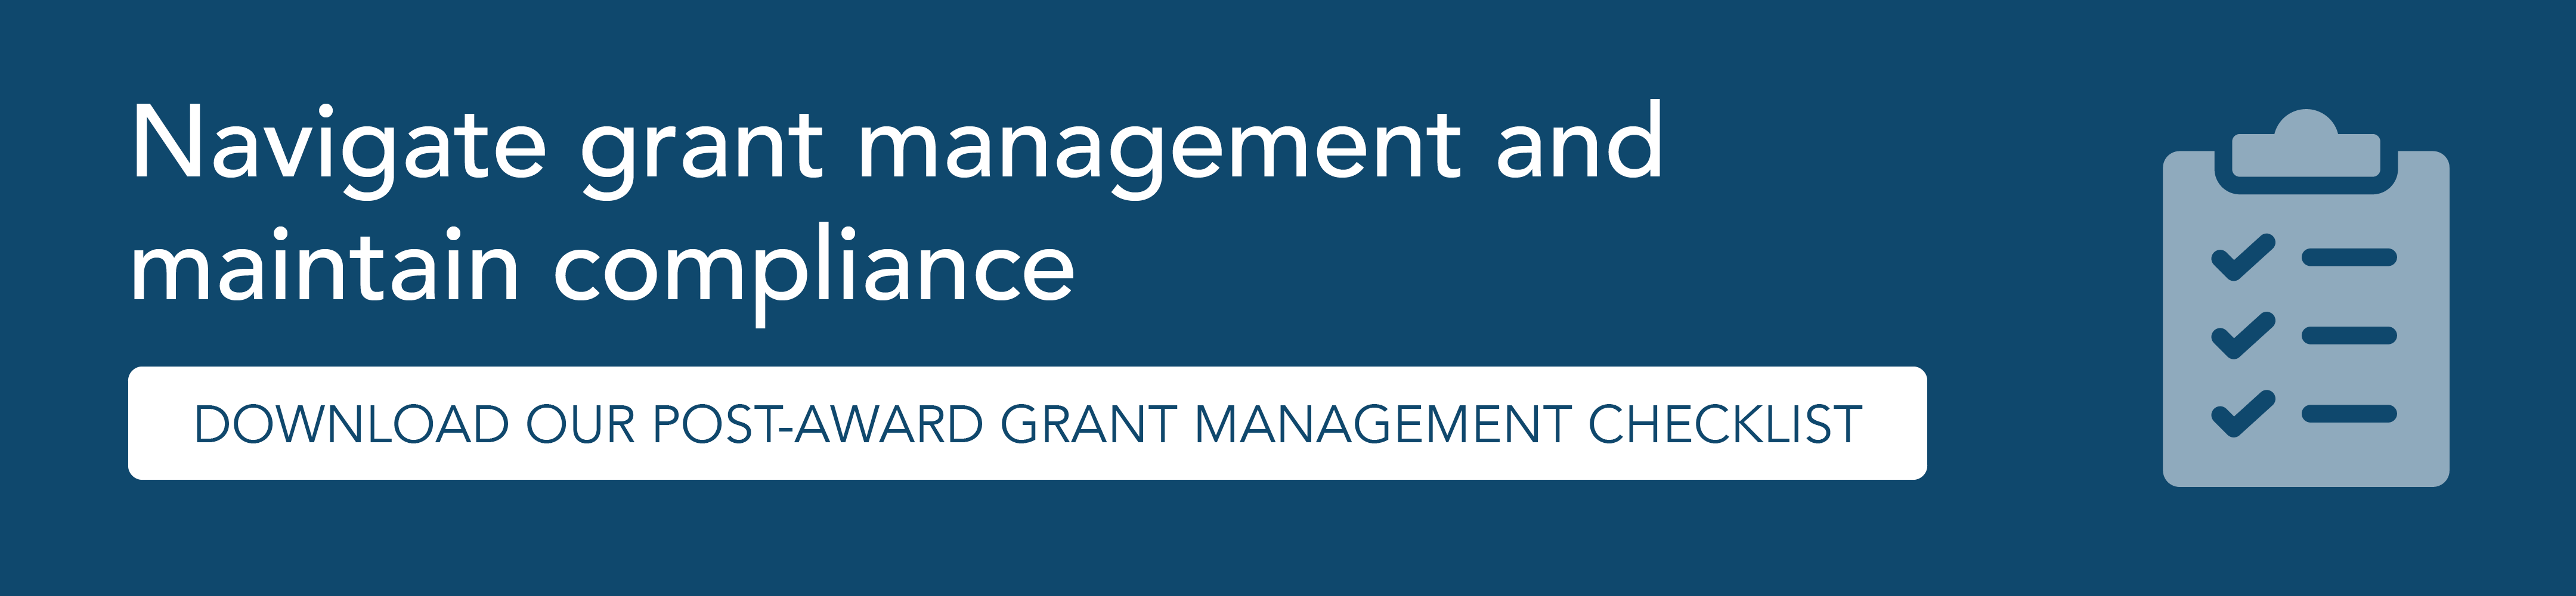 Download our post-award grant management checklist.